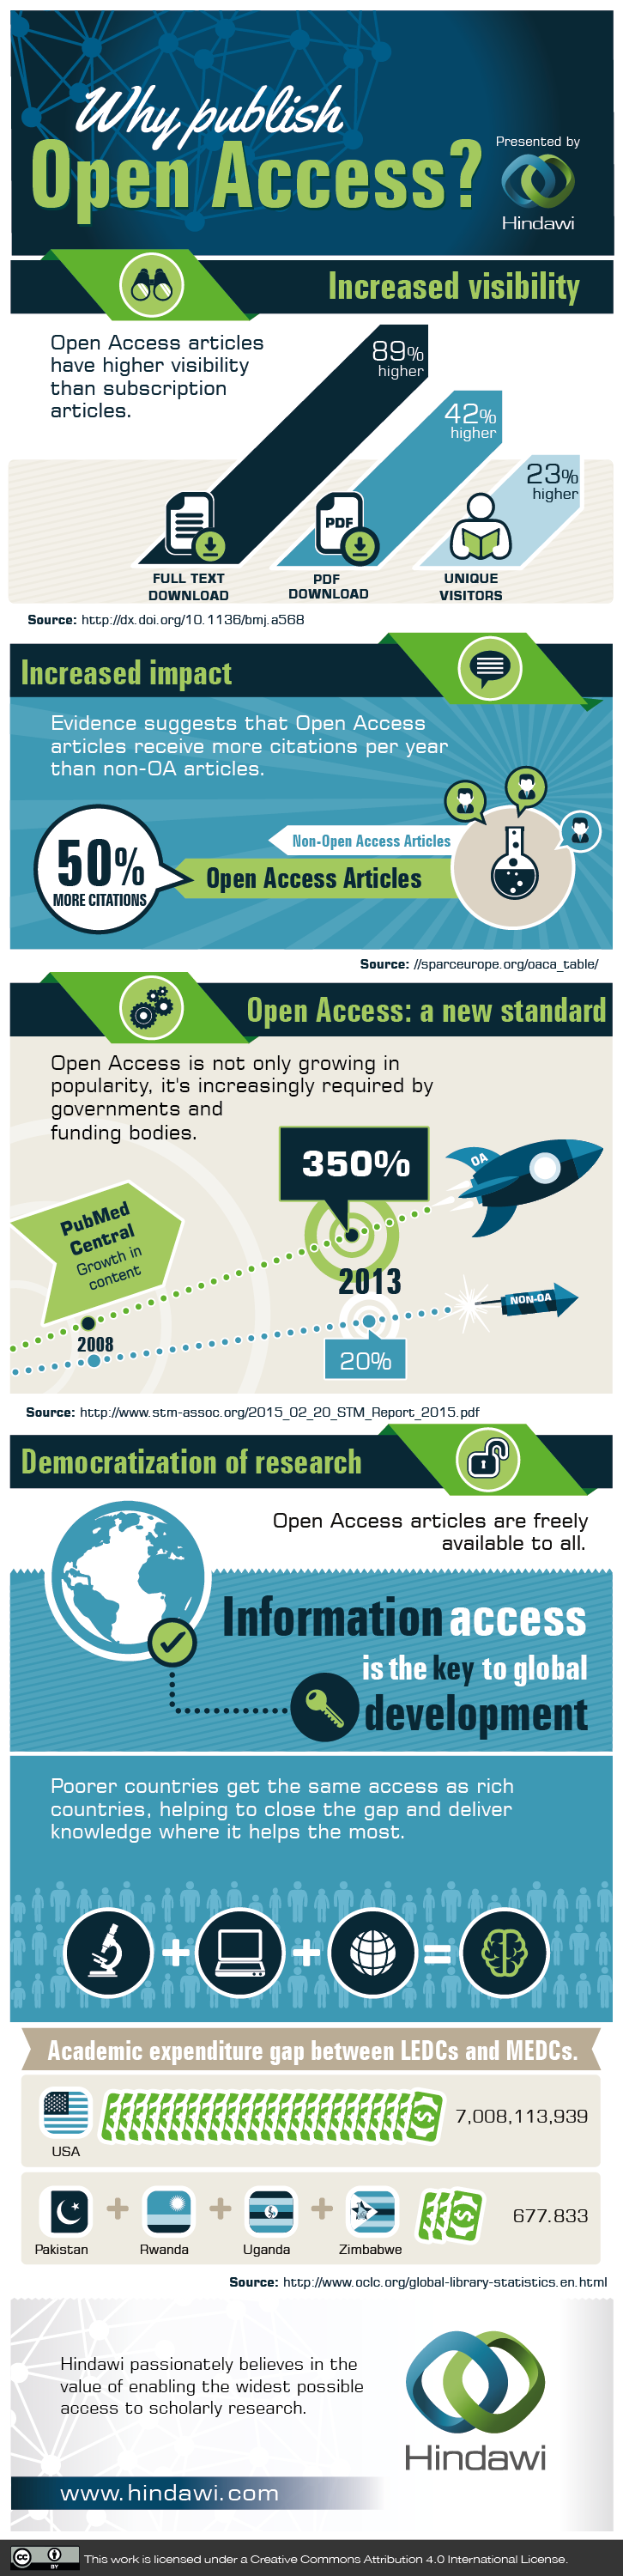 Why should researchers publish open access?